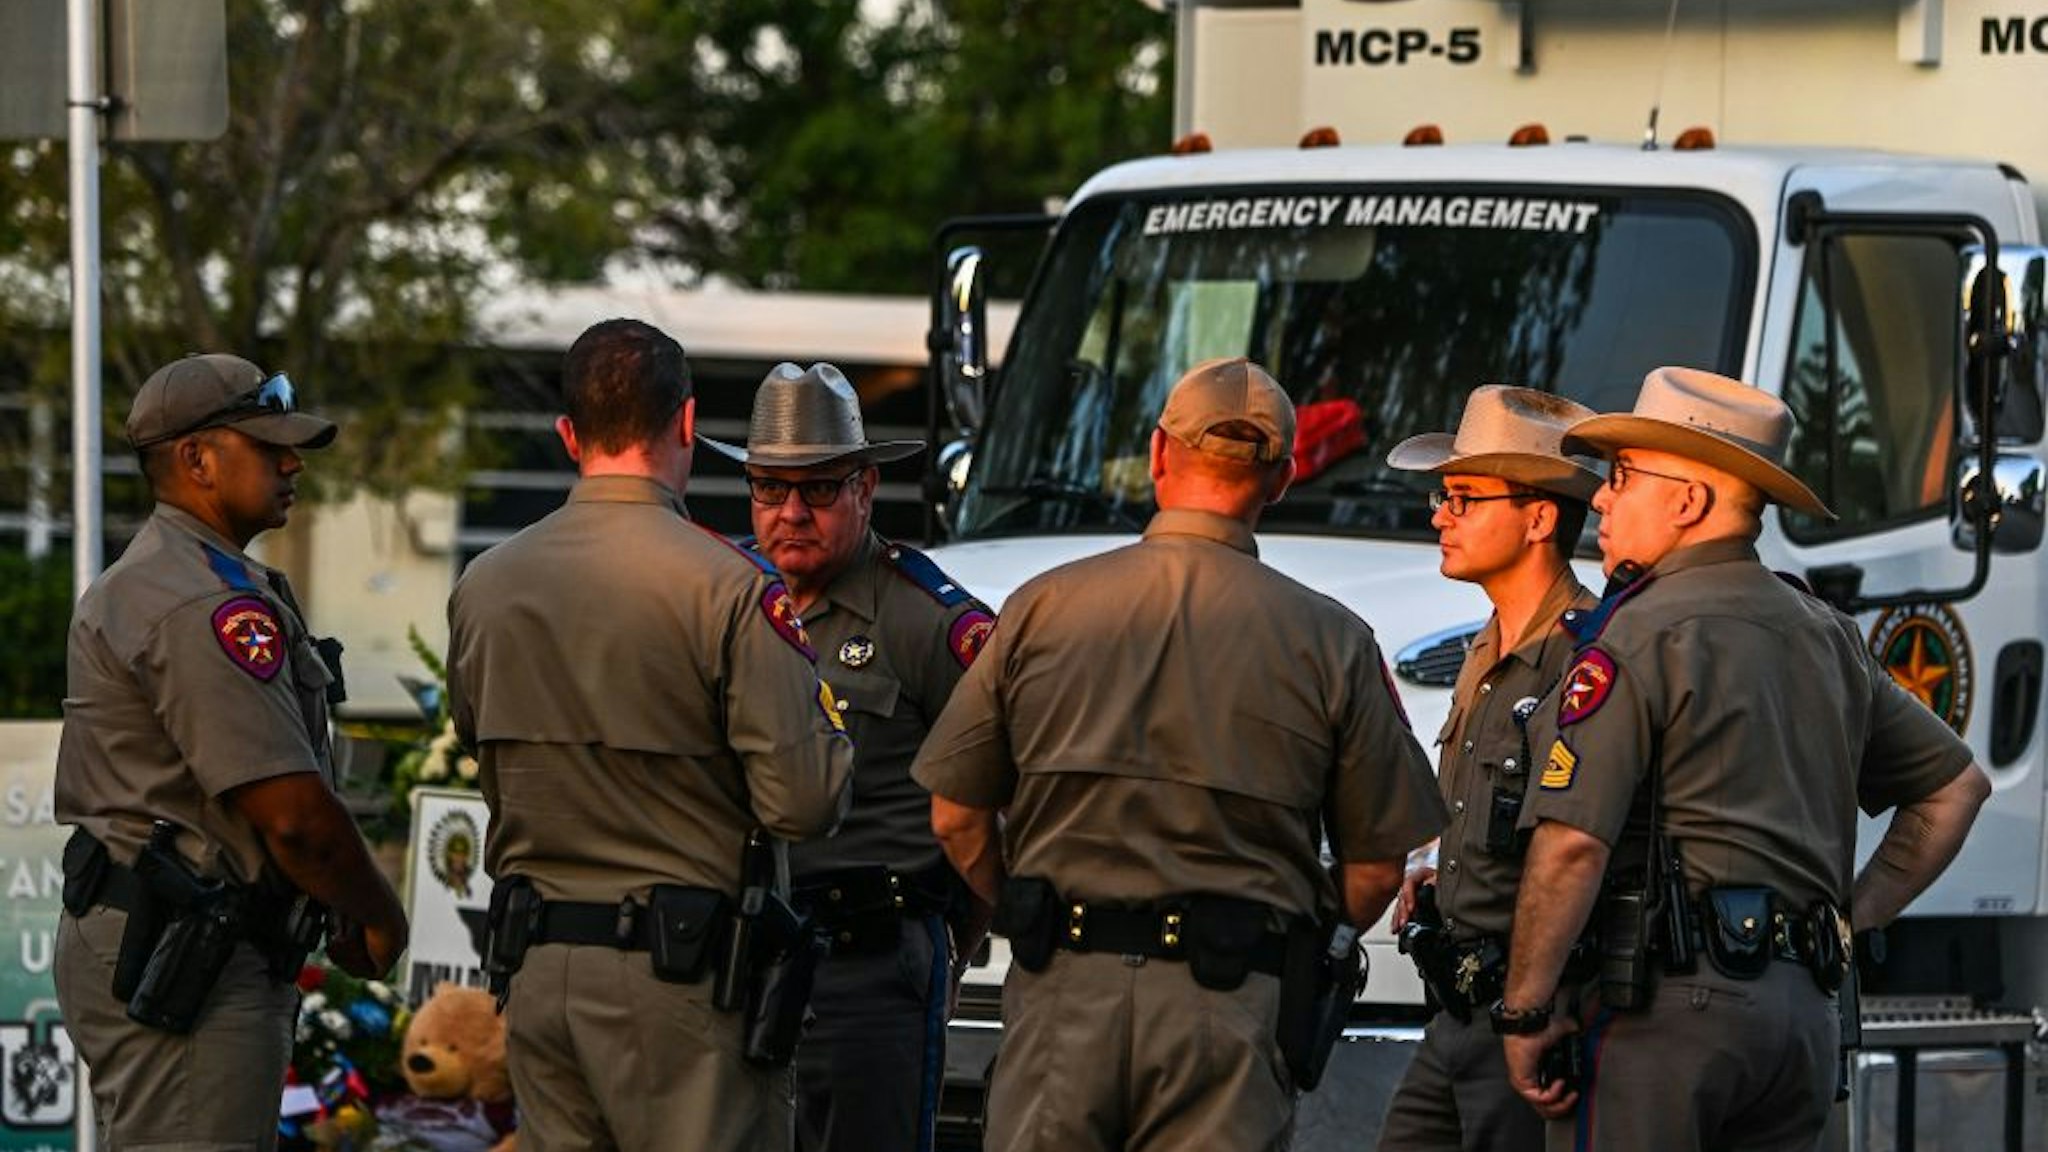 Police officers speak near a makeshift memorial for the shooting victims outside Robb Elementary School in Uvalde, Texas, on May 27, 2022. - Texas police faced angry questions May 26, 2022 over why it took an hour to neutralize the gunman who murdered 19 small children and two teachers in Uvalde, as video emerged of desperate parents begging officers to storm the school. (Photo by CHANDAN KHANNA / AFP) (Photo by CHANDAN KHANNA/AFP via Getty Images)